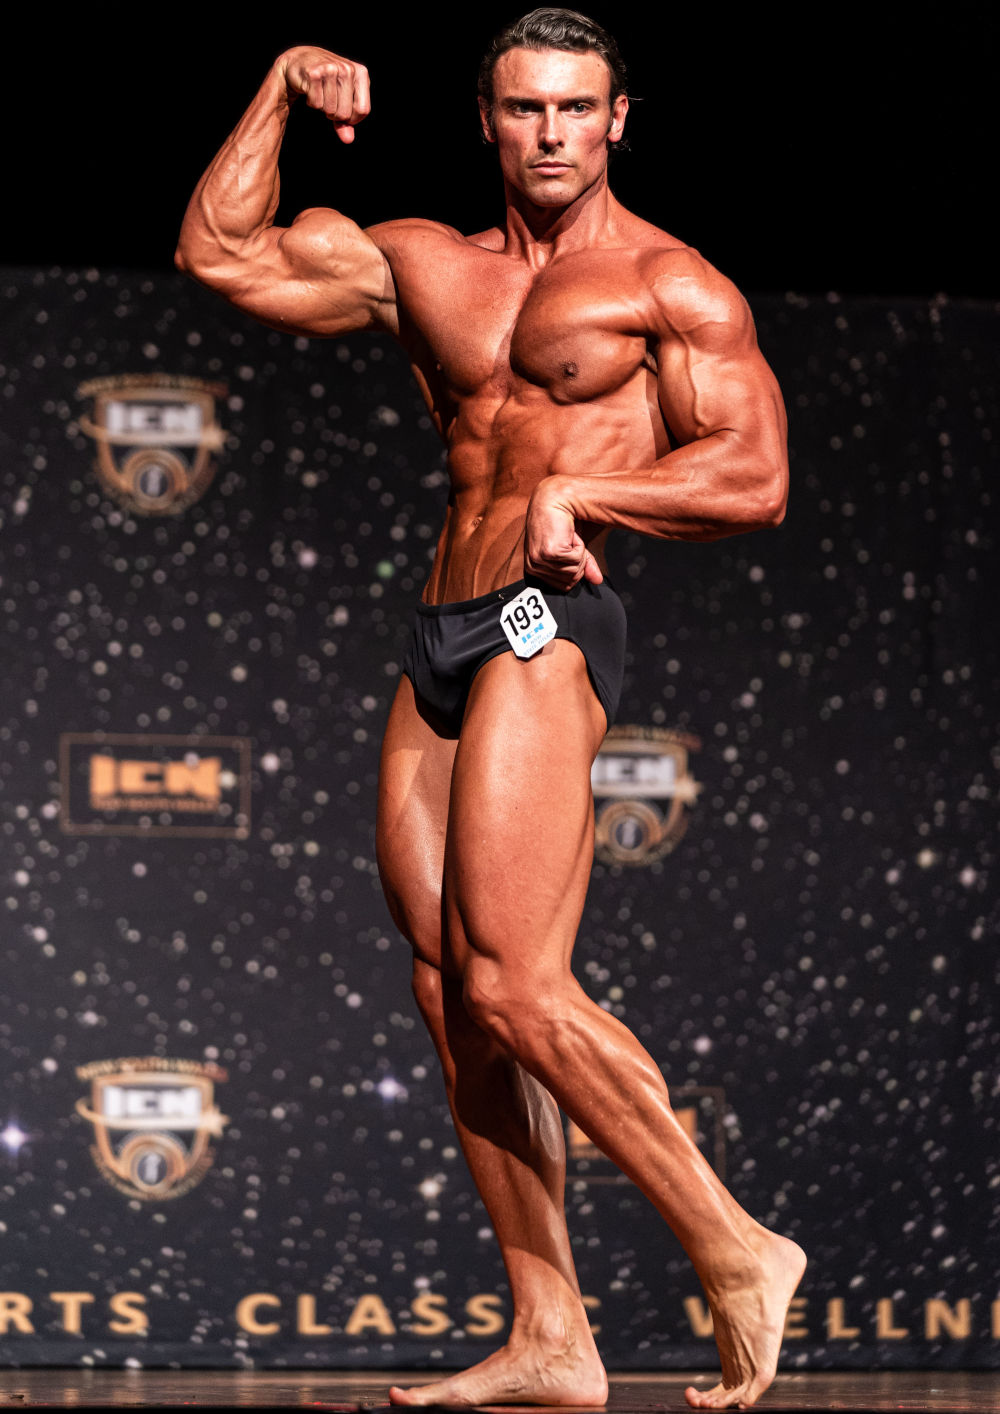 Is men's physique becoming a joke and why? : r/bodybuilding